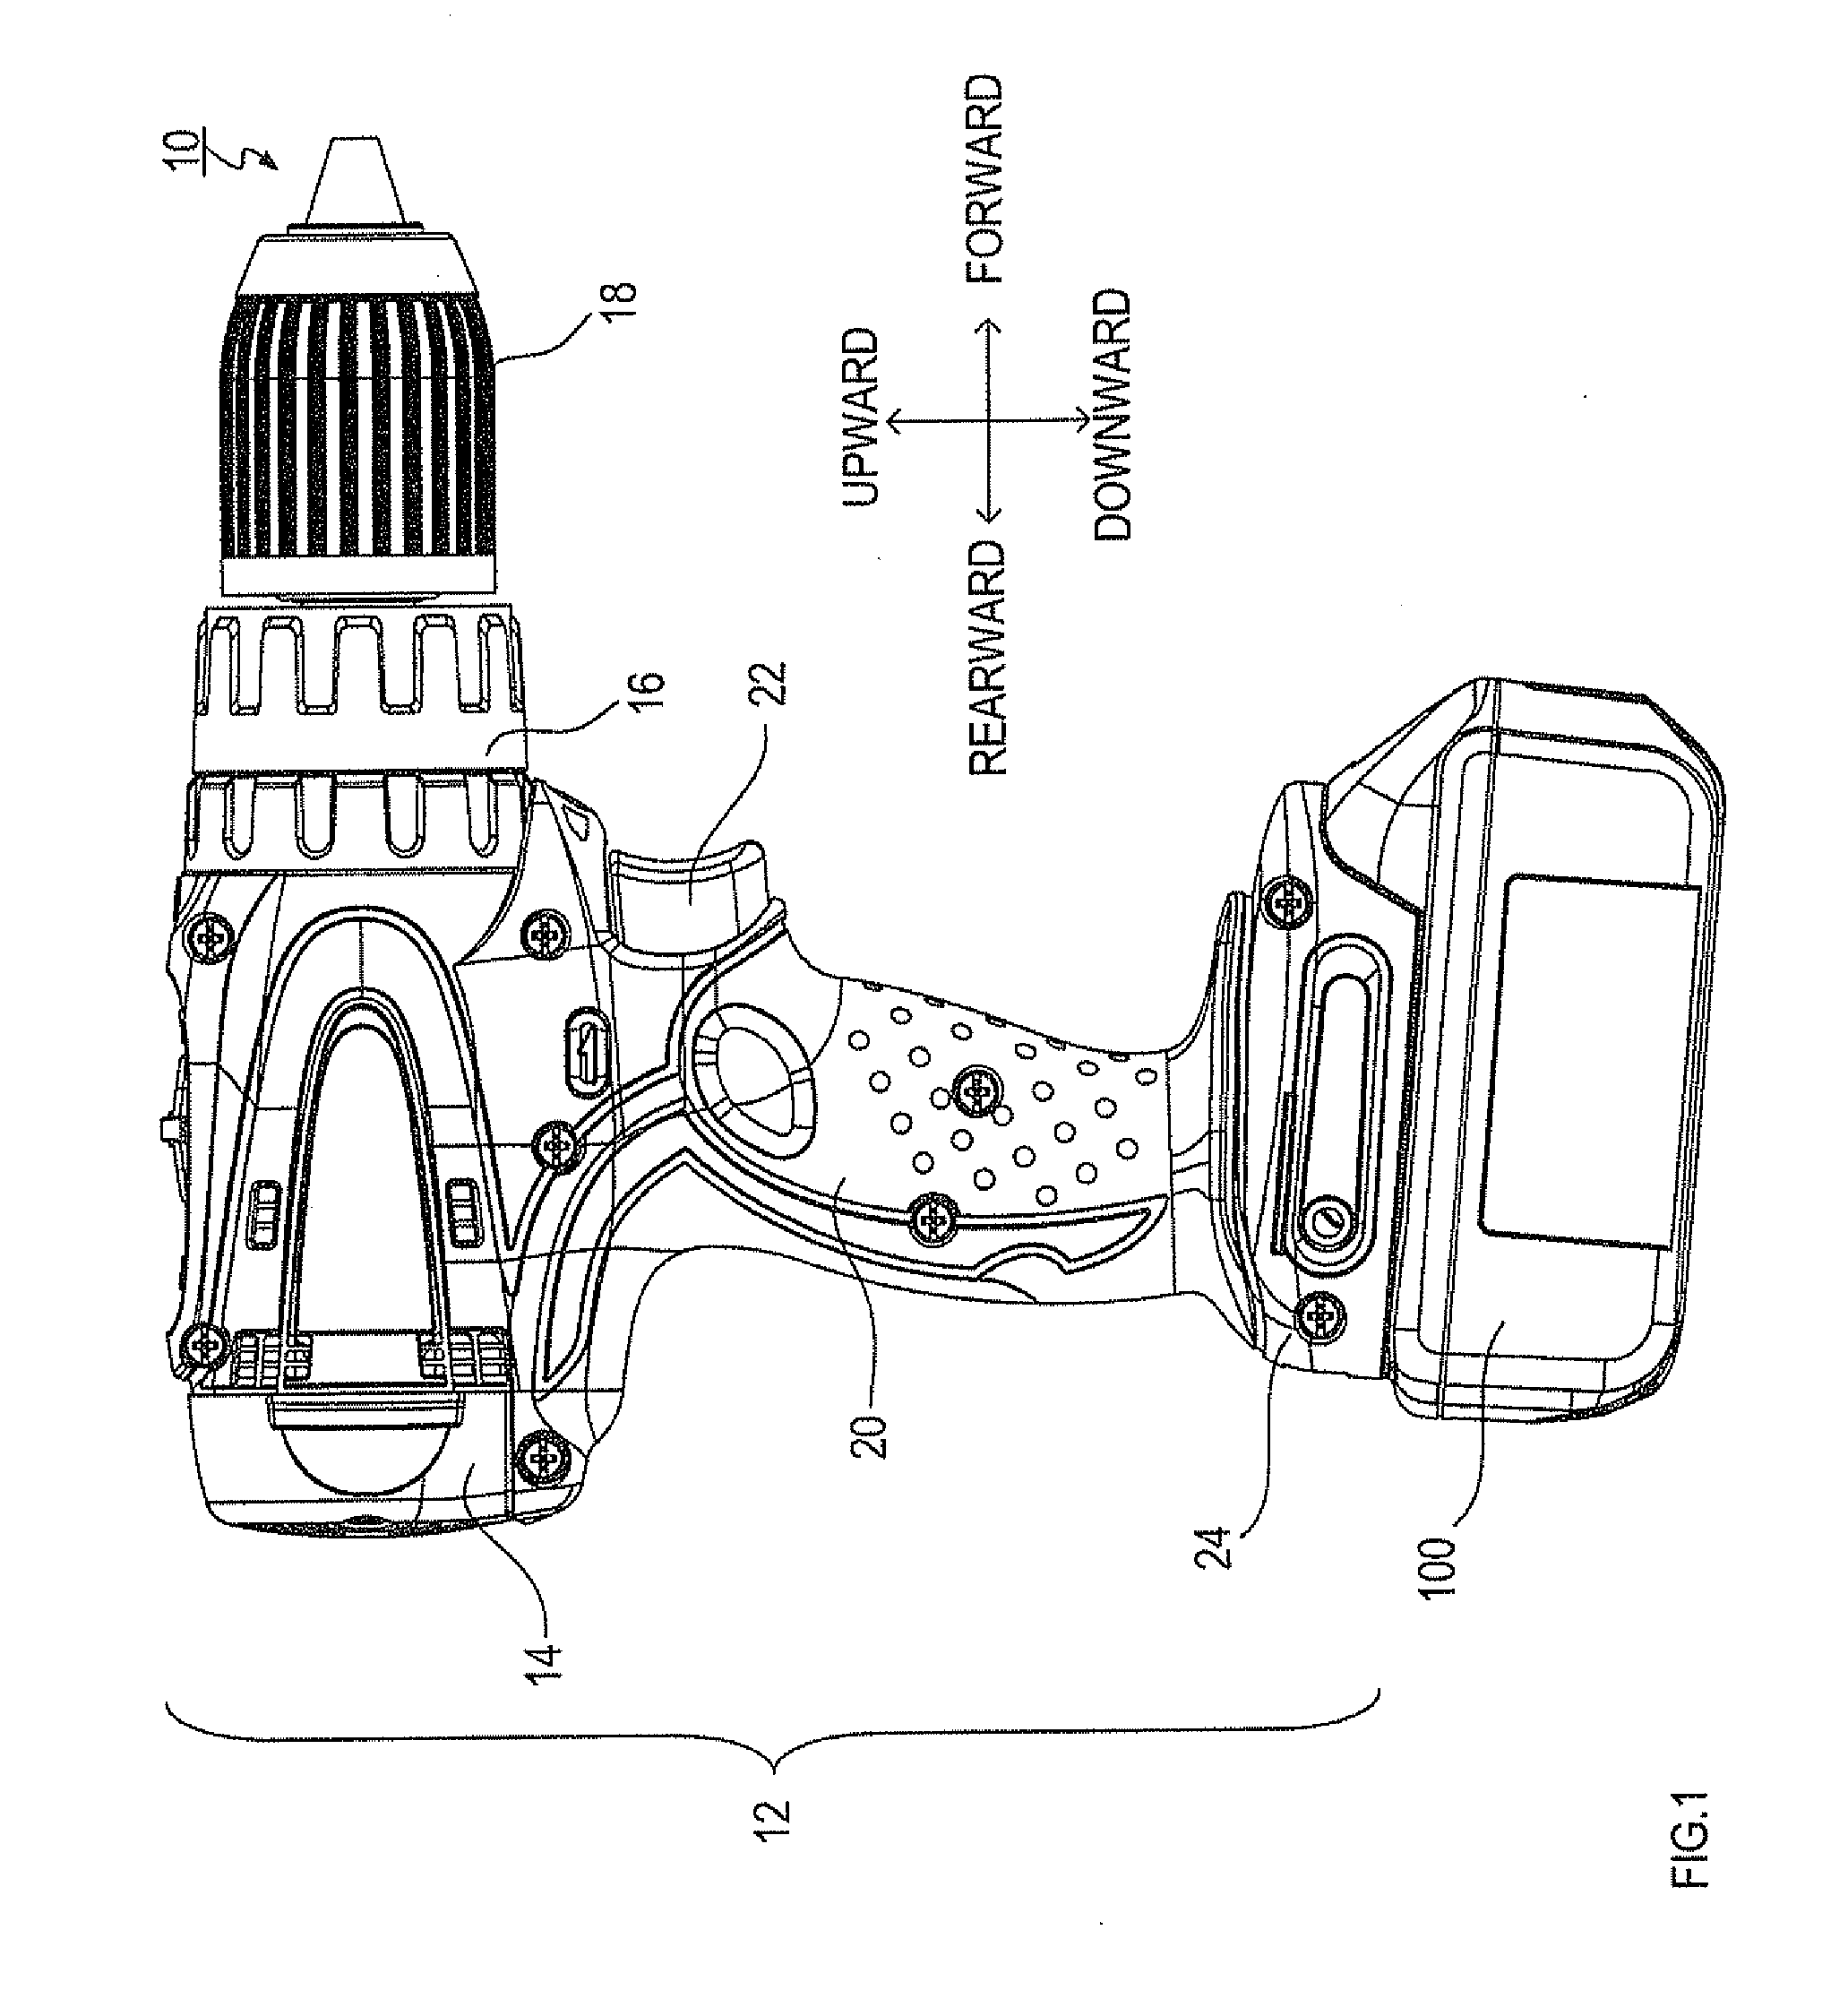 Battery pack for electric power tool, and battery connection device